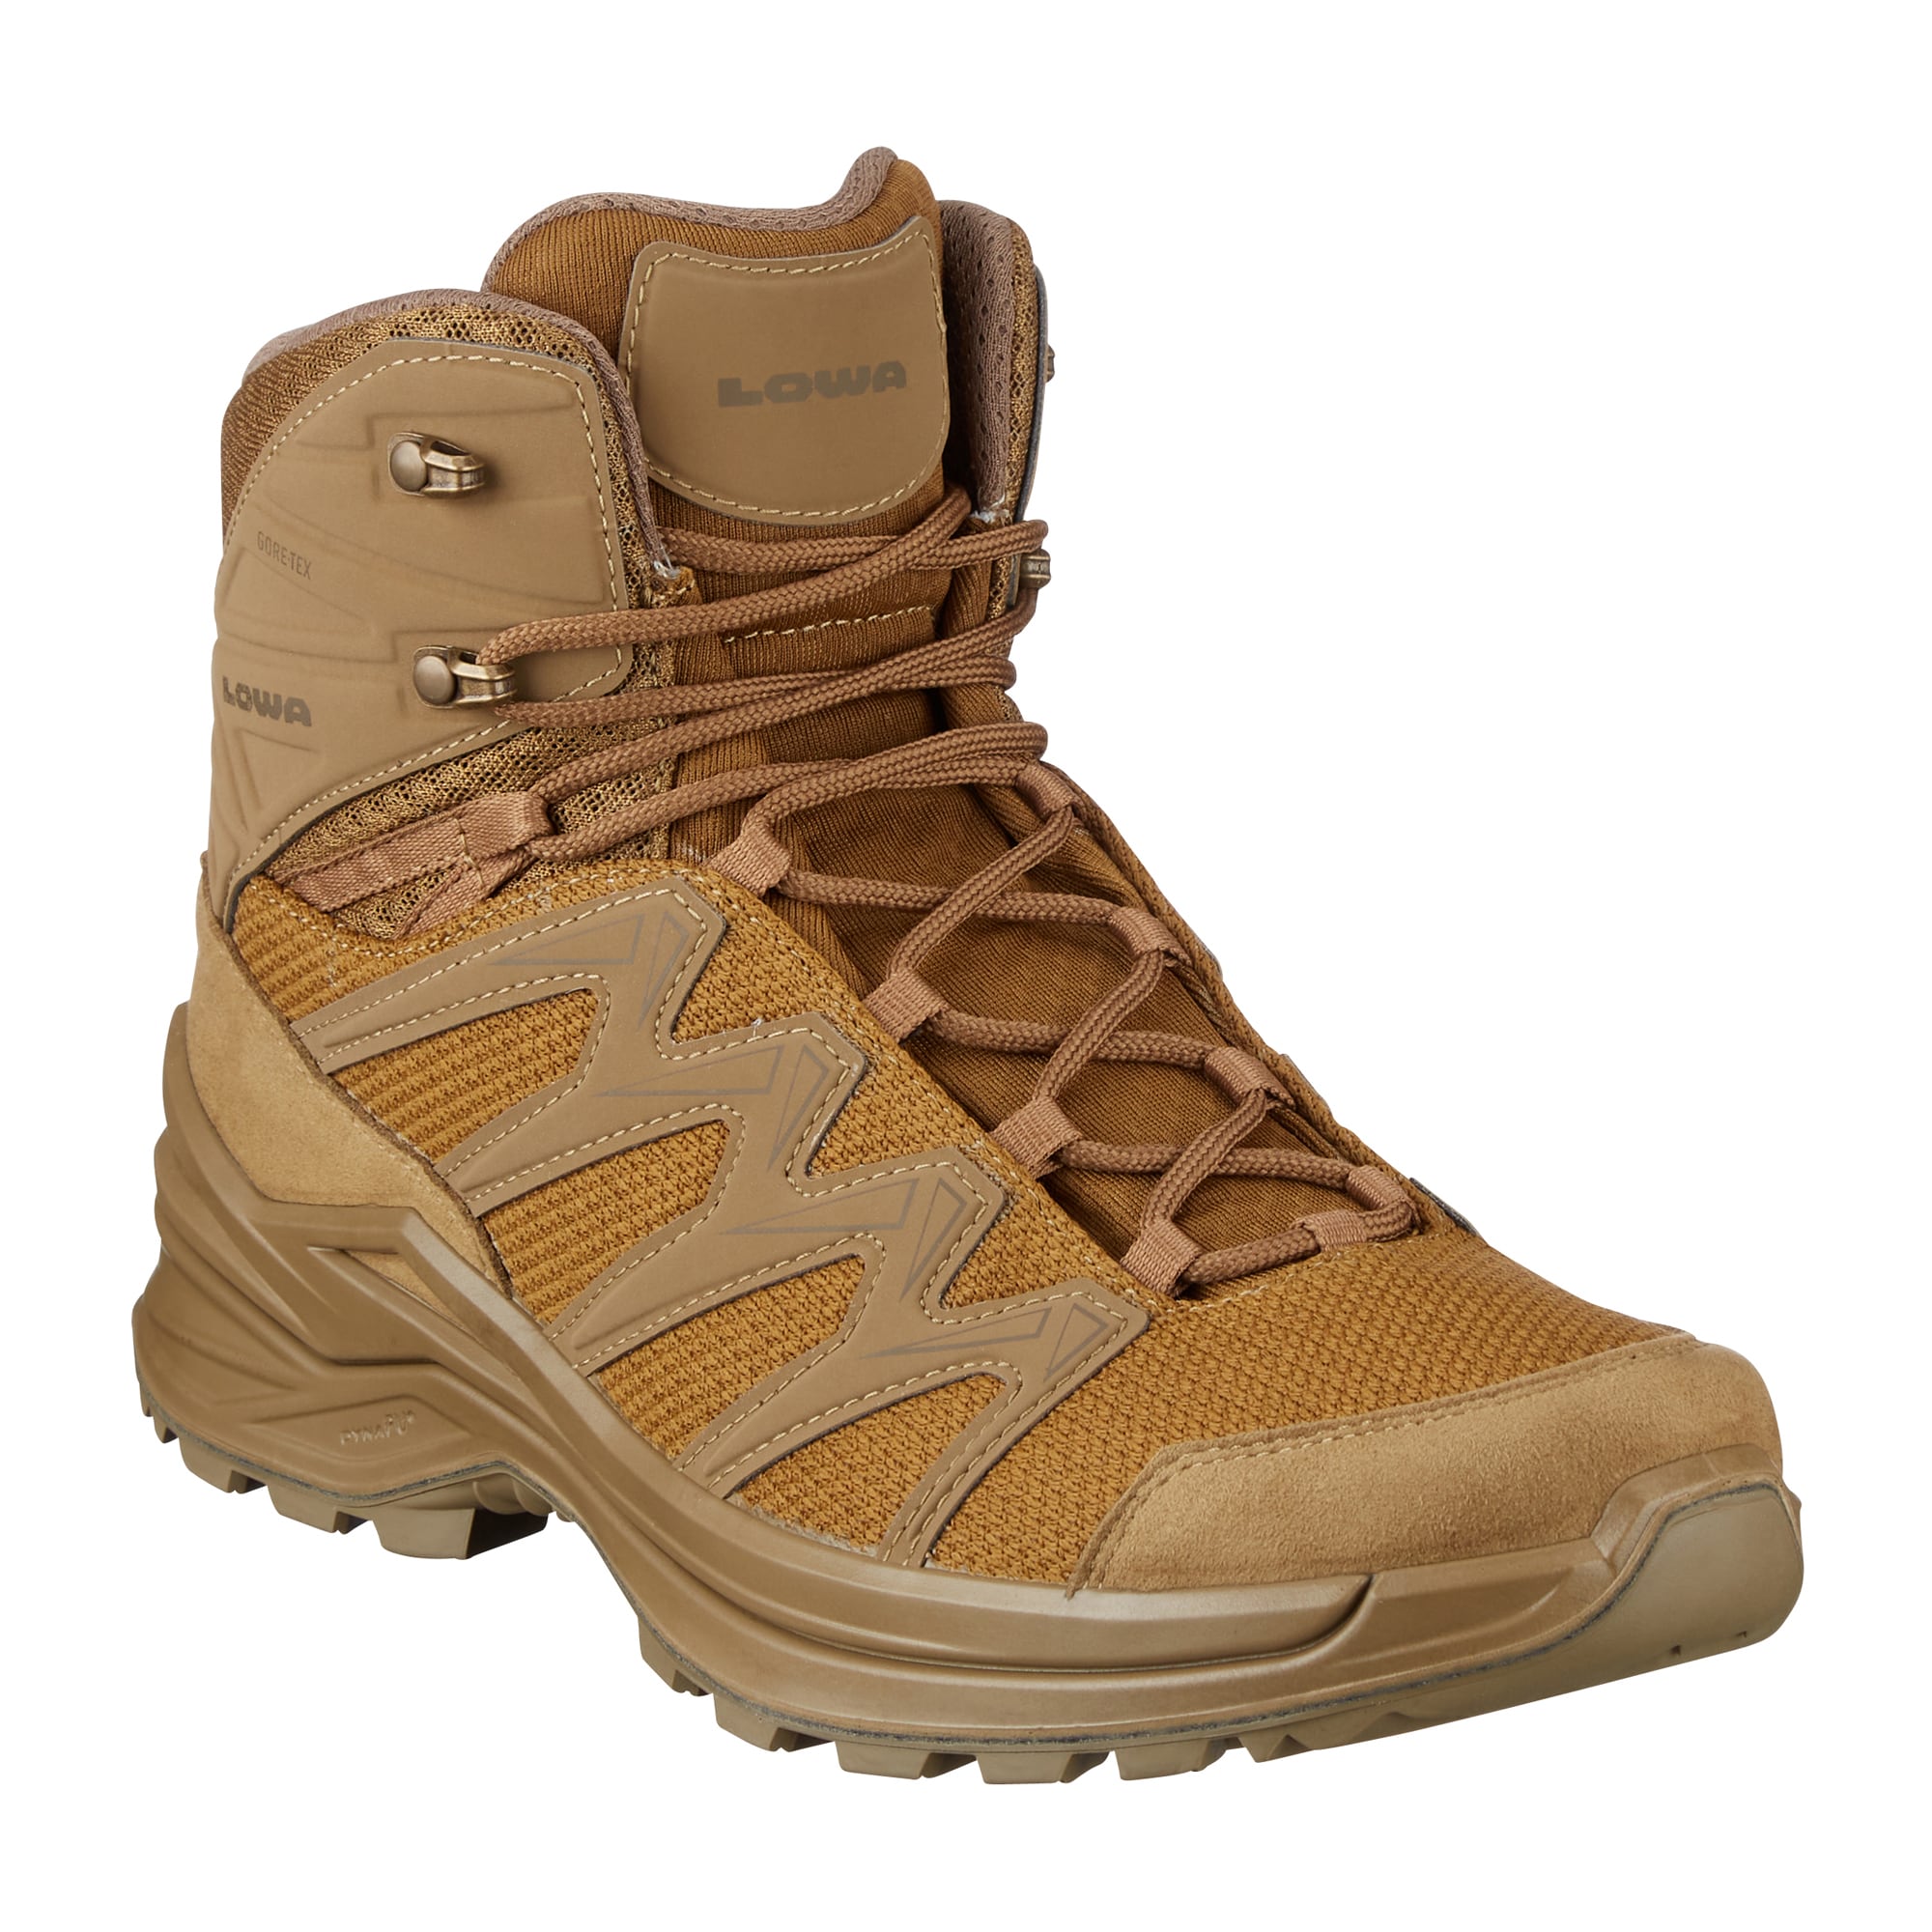 Purchase the LOWA Boots Innox Pro GTX Mid TF coyote op by ASMC